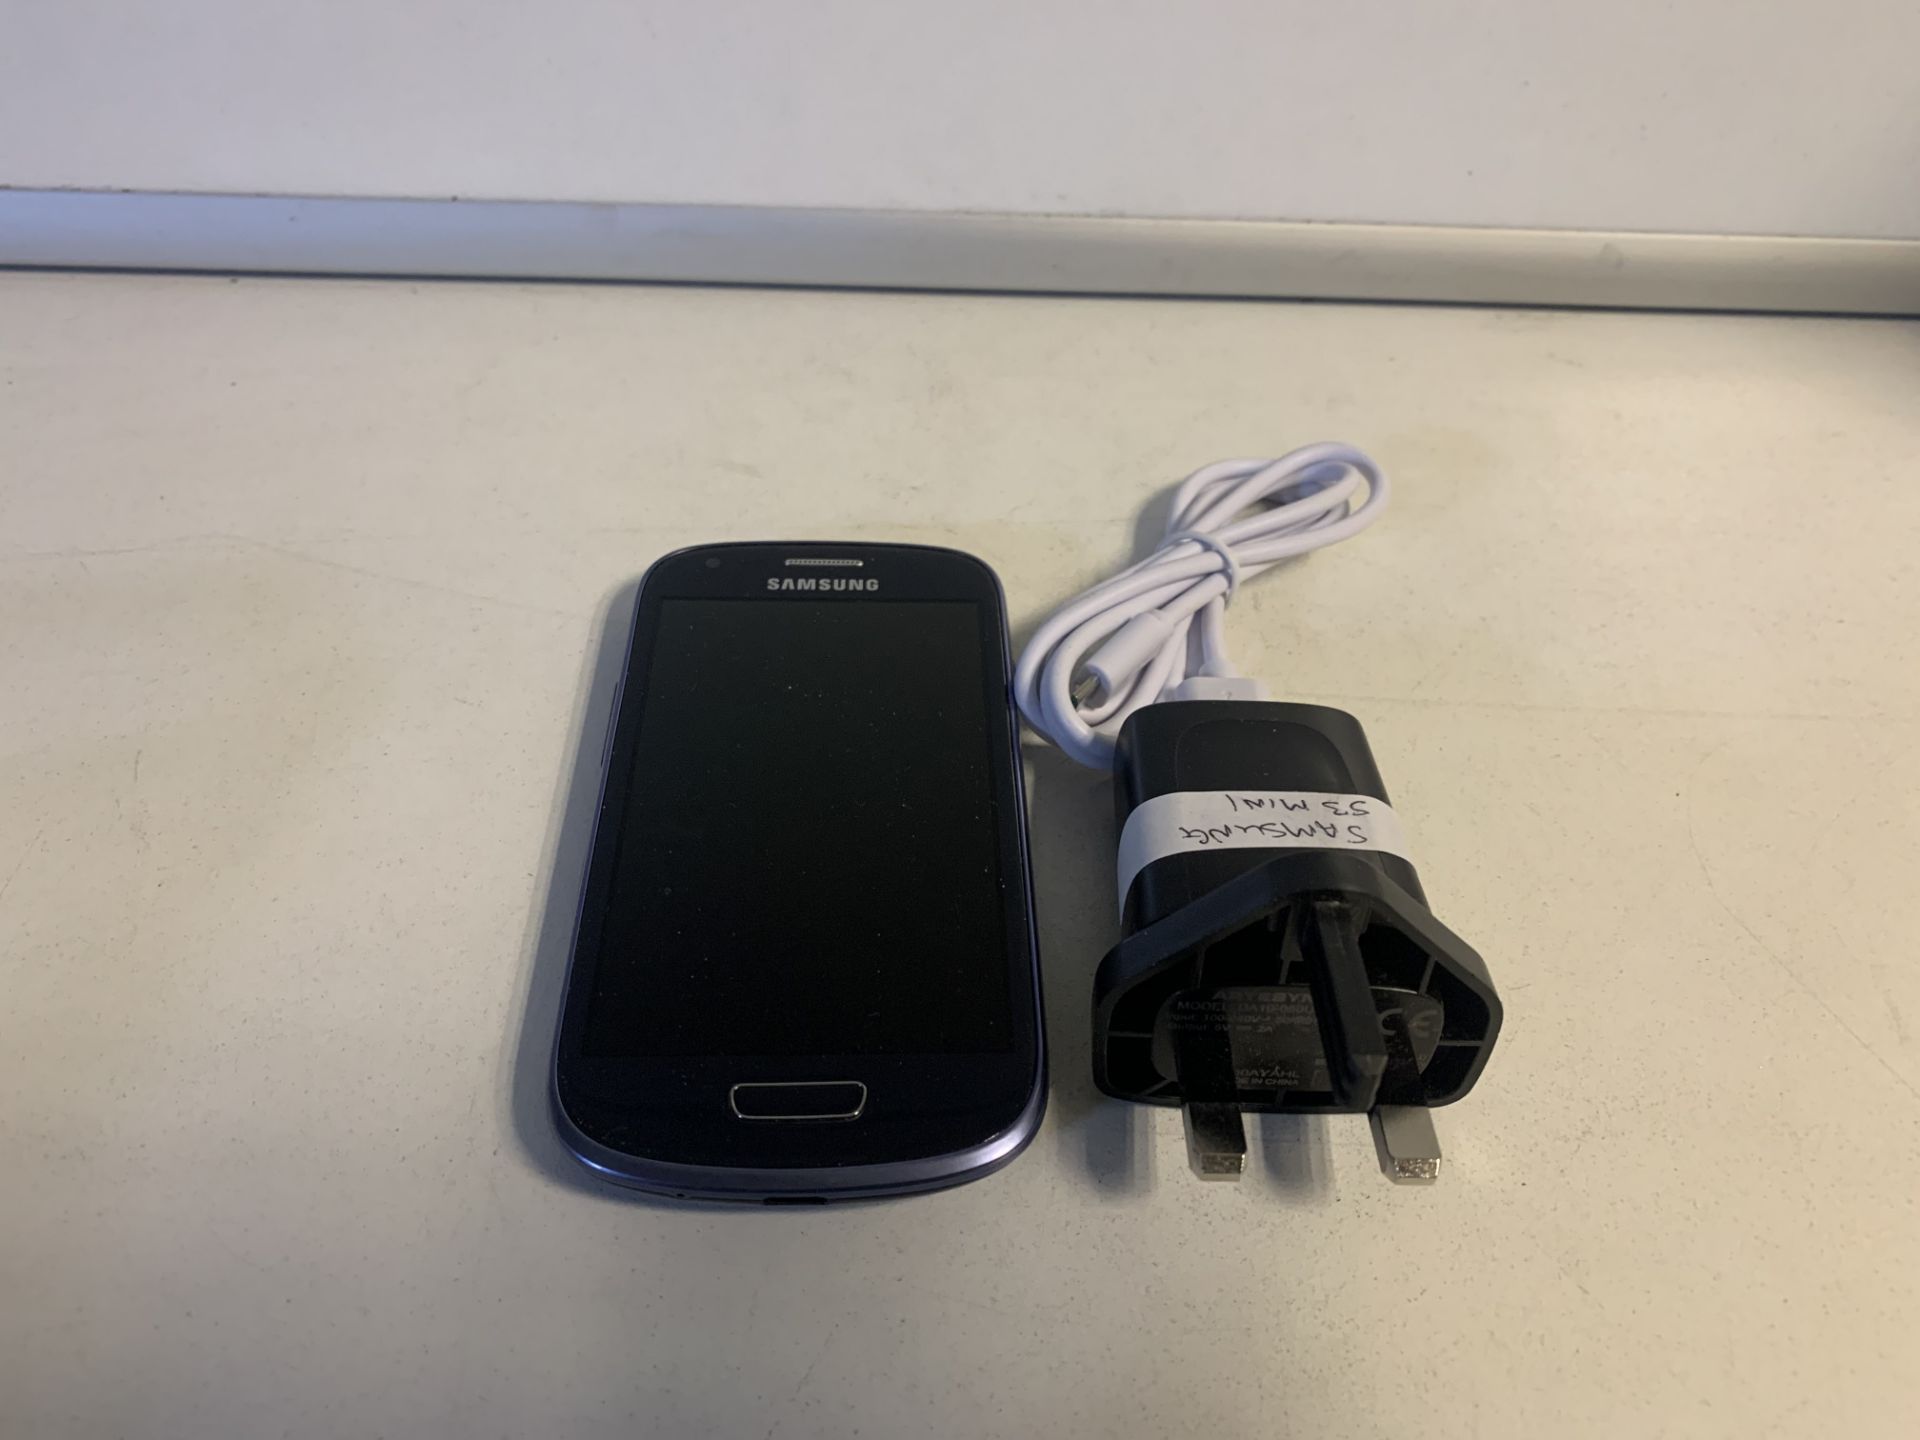 SAMSUNG S3 MINI SMARTPHPONE 8GB STORAGE WITH CHARGER (13/20)